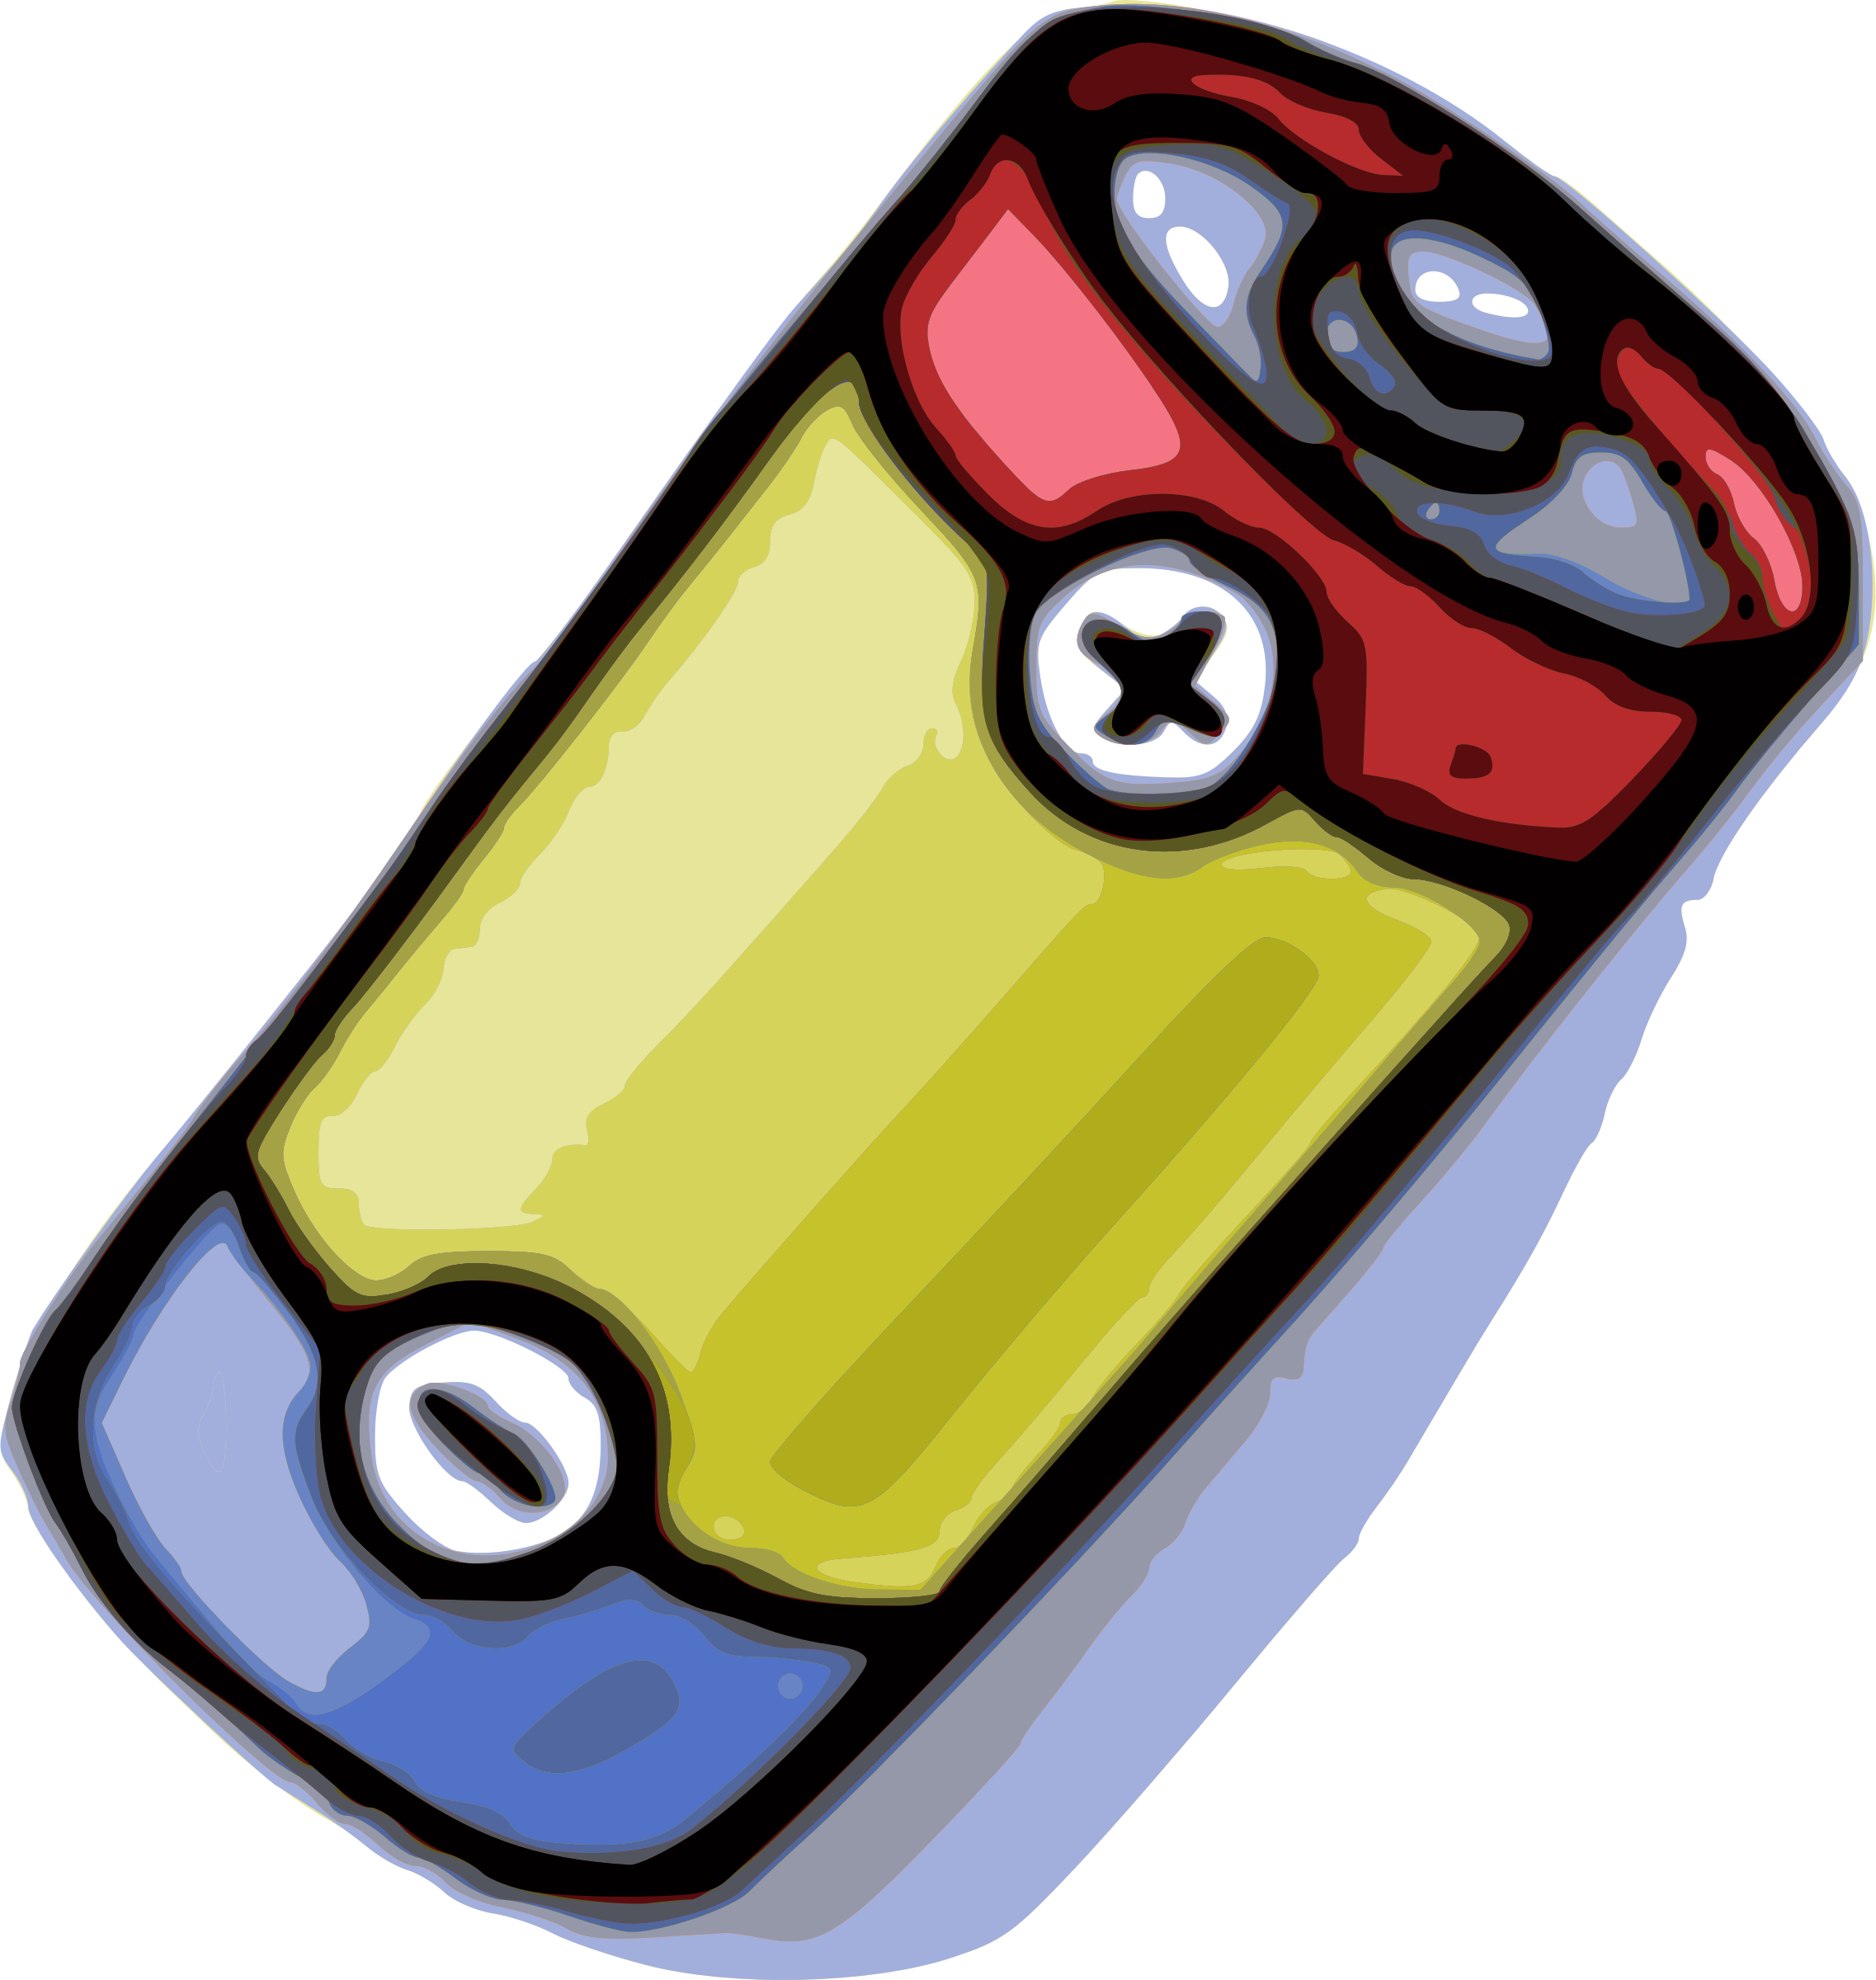 Simple battery Vector Clipart image.